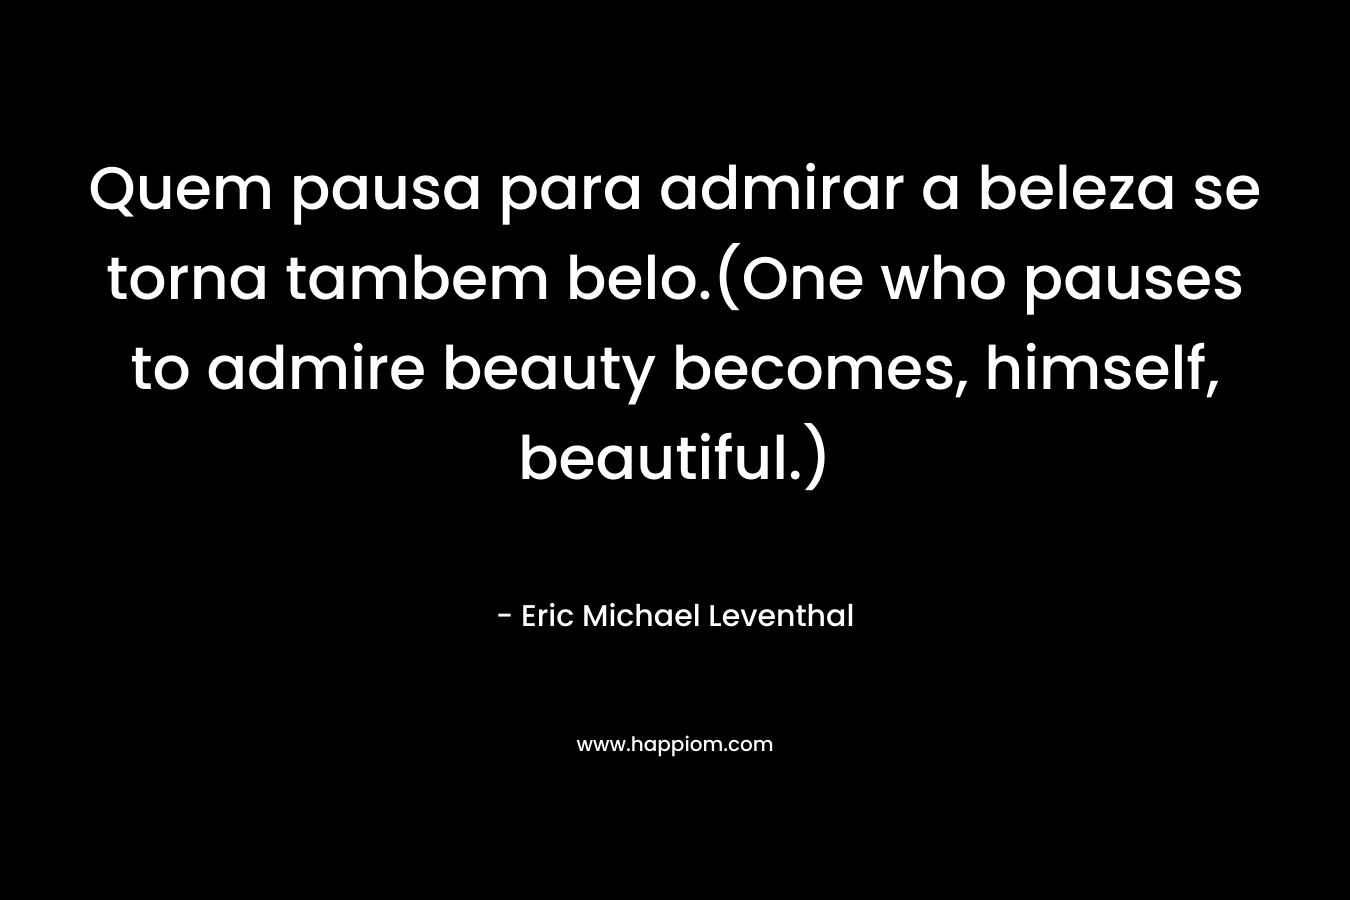 Quem pausa para admirar a beleza se torna tambem belo.(One who pauses to admire beauty becomes, himself, beautiful.) – Eric Michael Leventhal